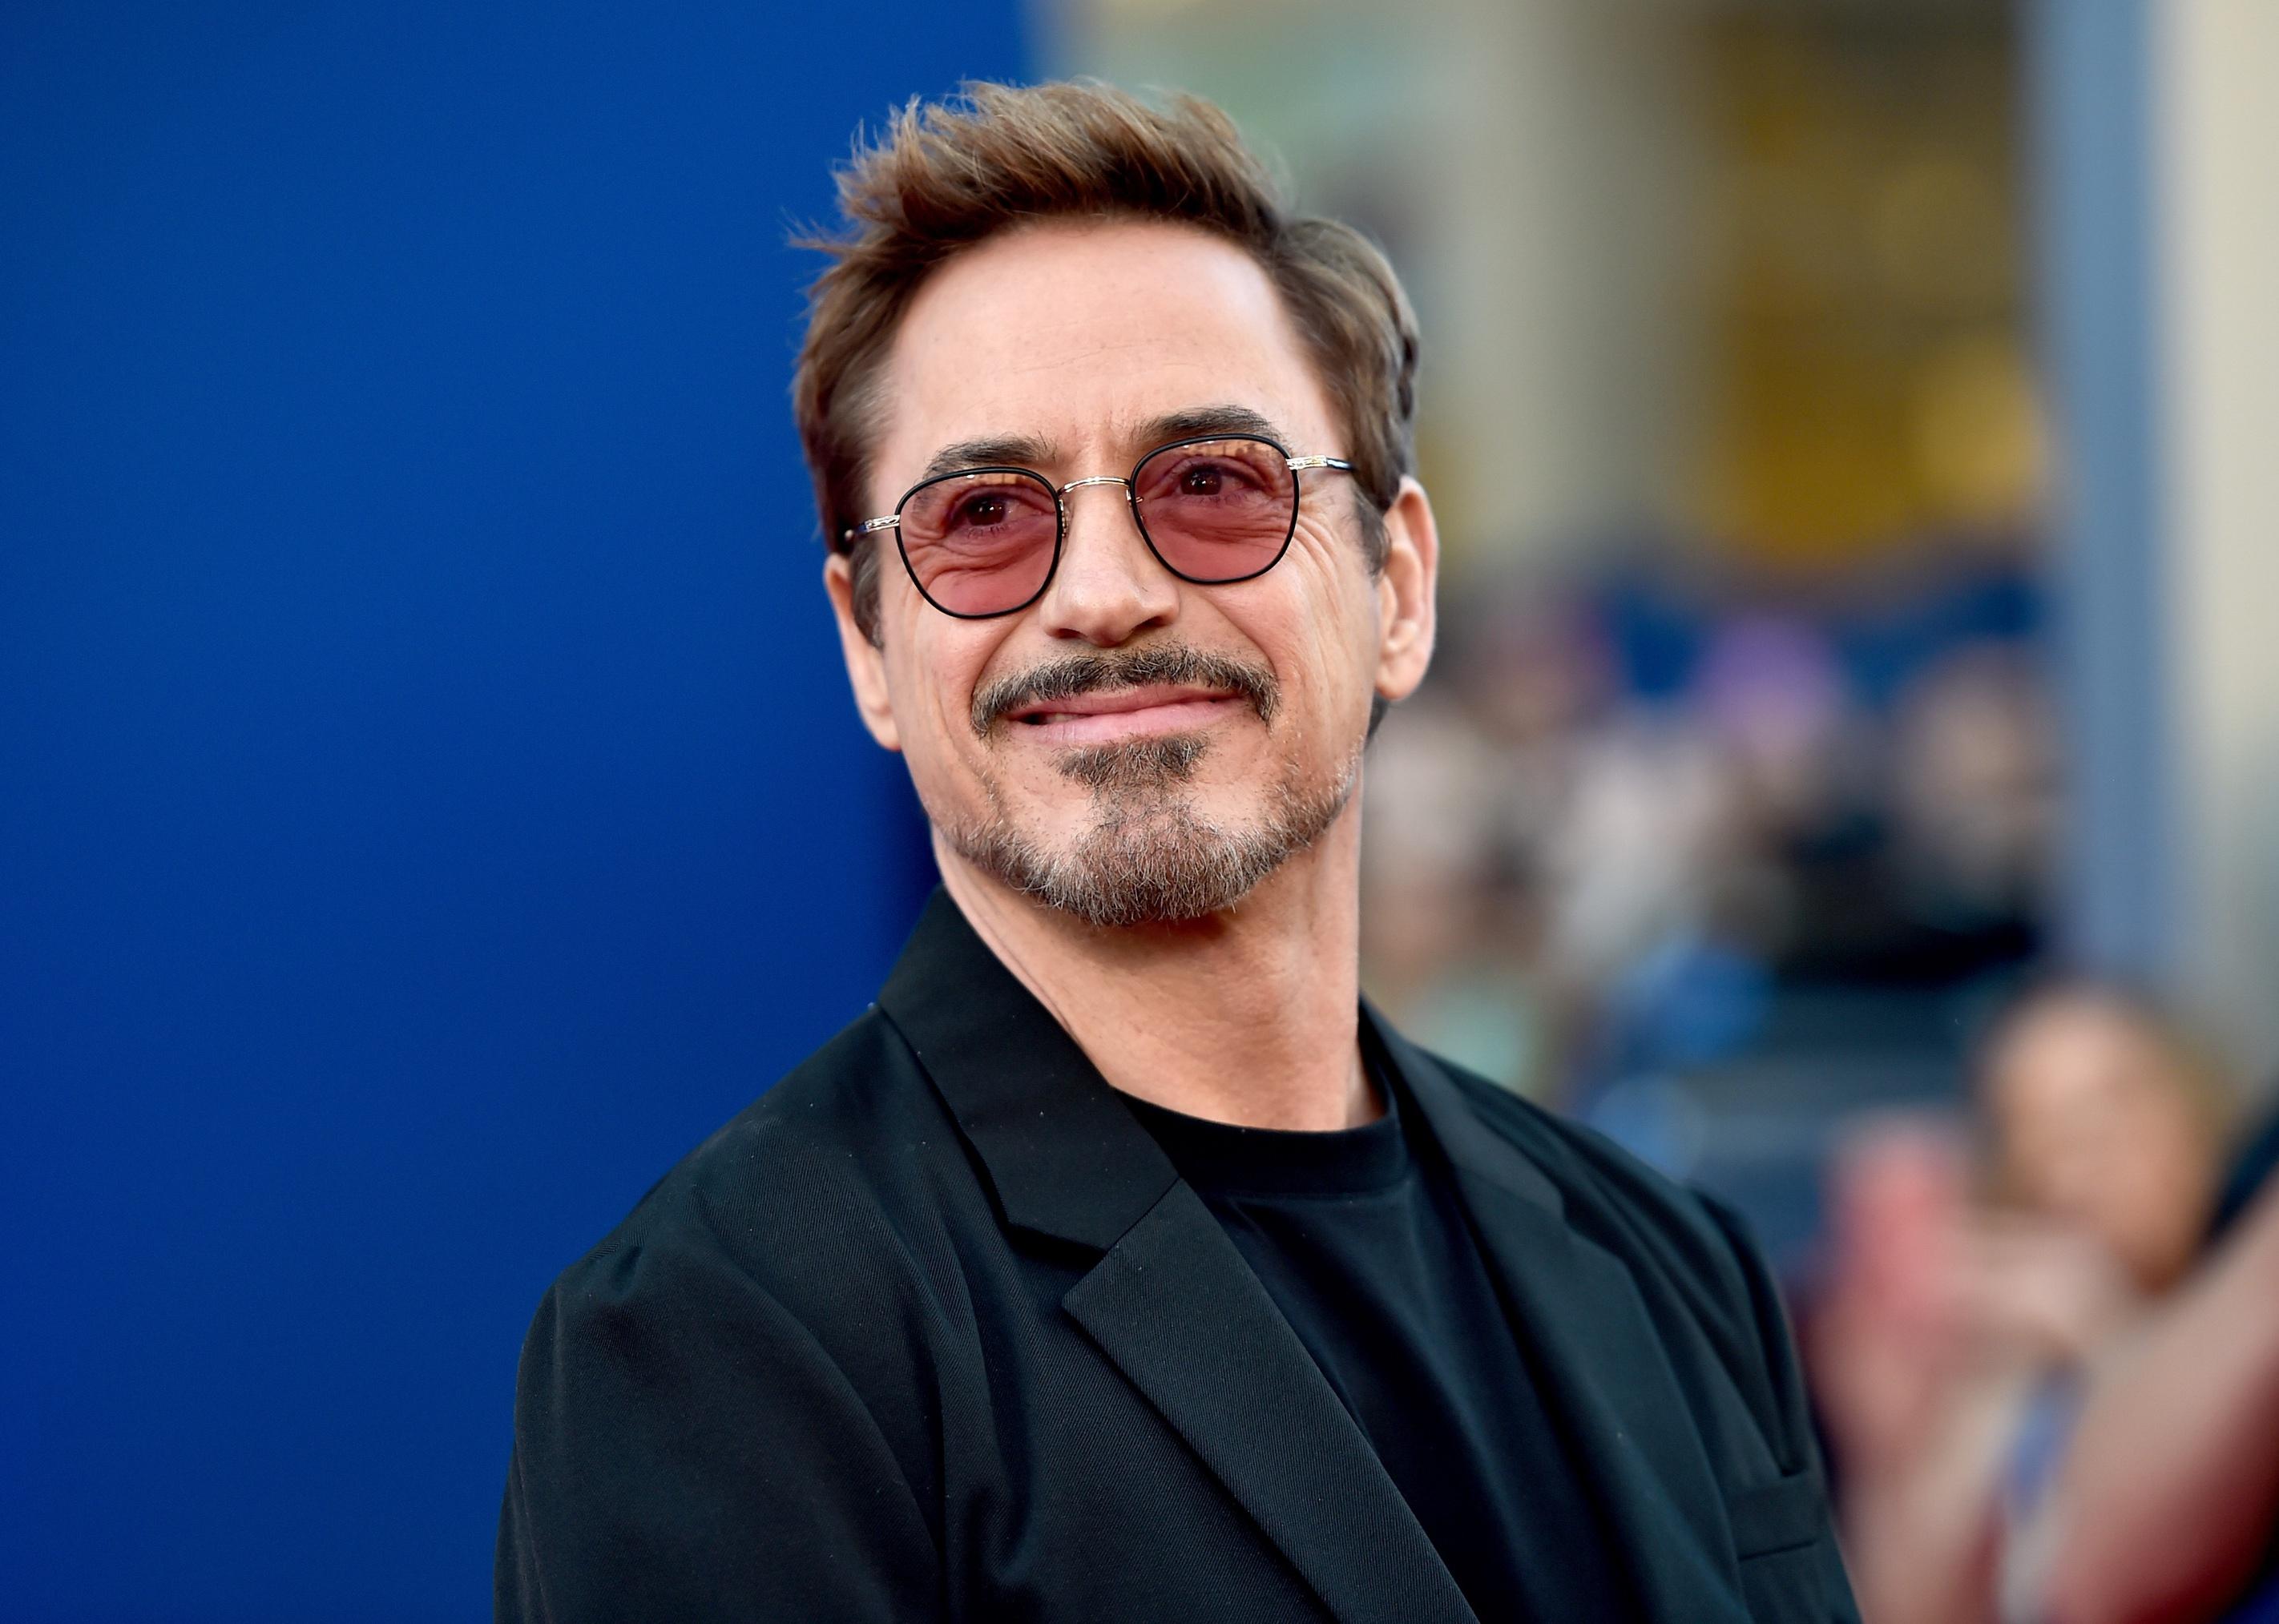 Robert Downey Jr. attends the premiere of Columbia Pictures' "Spider-Man: Homecoming".